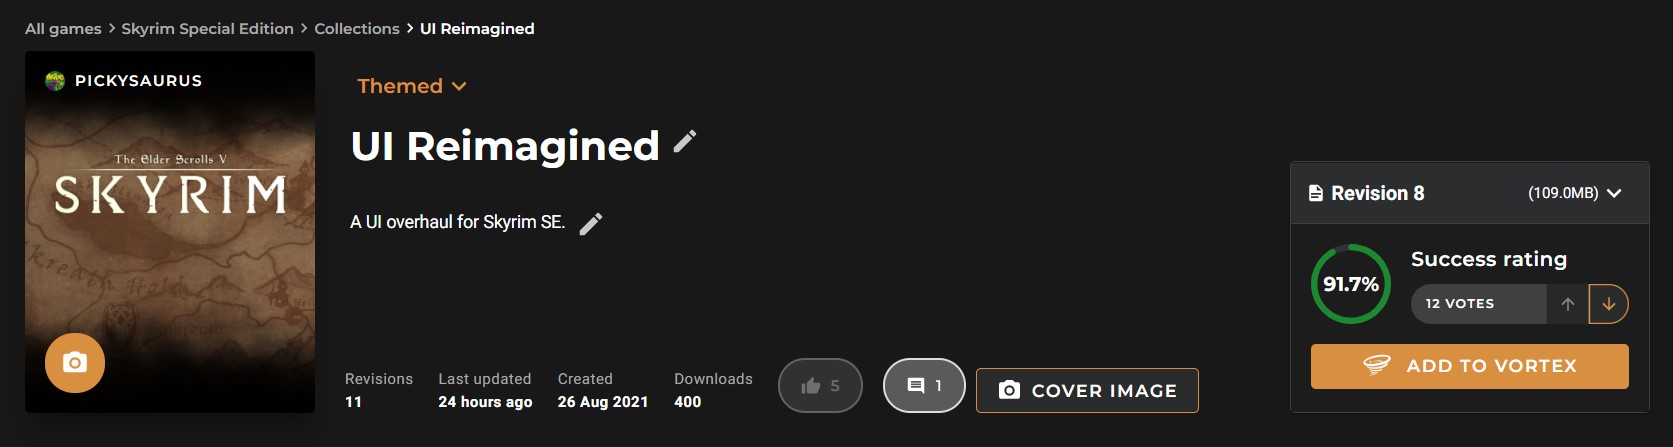 The collection header showing 400 downloads, 5 endorsements and 12 votes with a 91.7% success rating